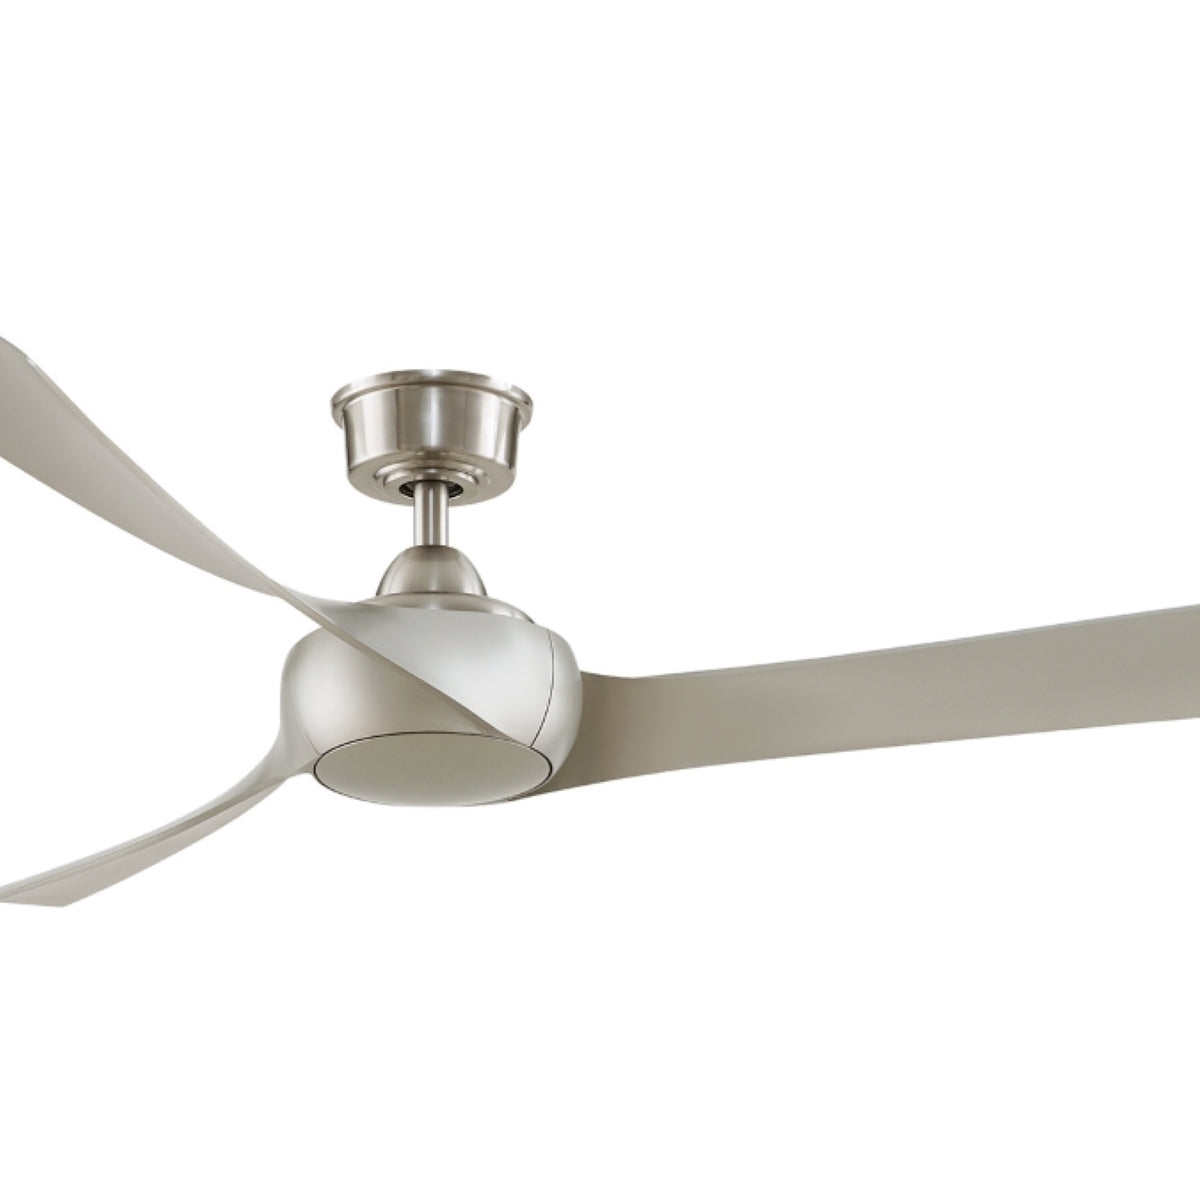 Wrap Custom Indoor/Outdoor Ceiling Fan Motor With Remote, 44-60" Blades Sold Separately - Bees Lighting